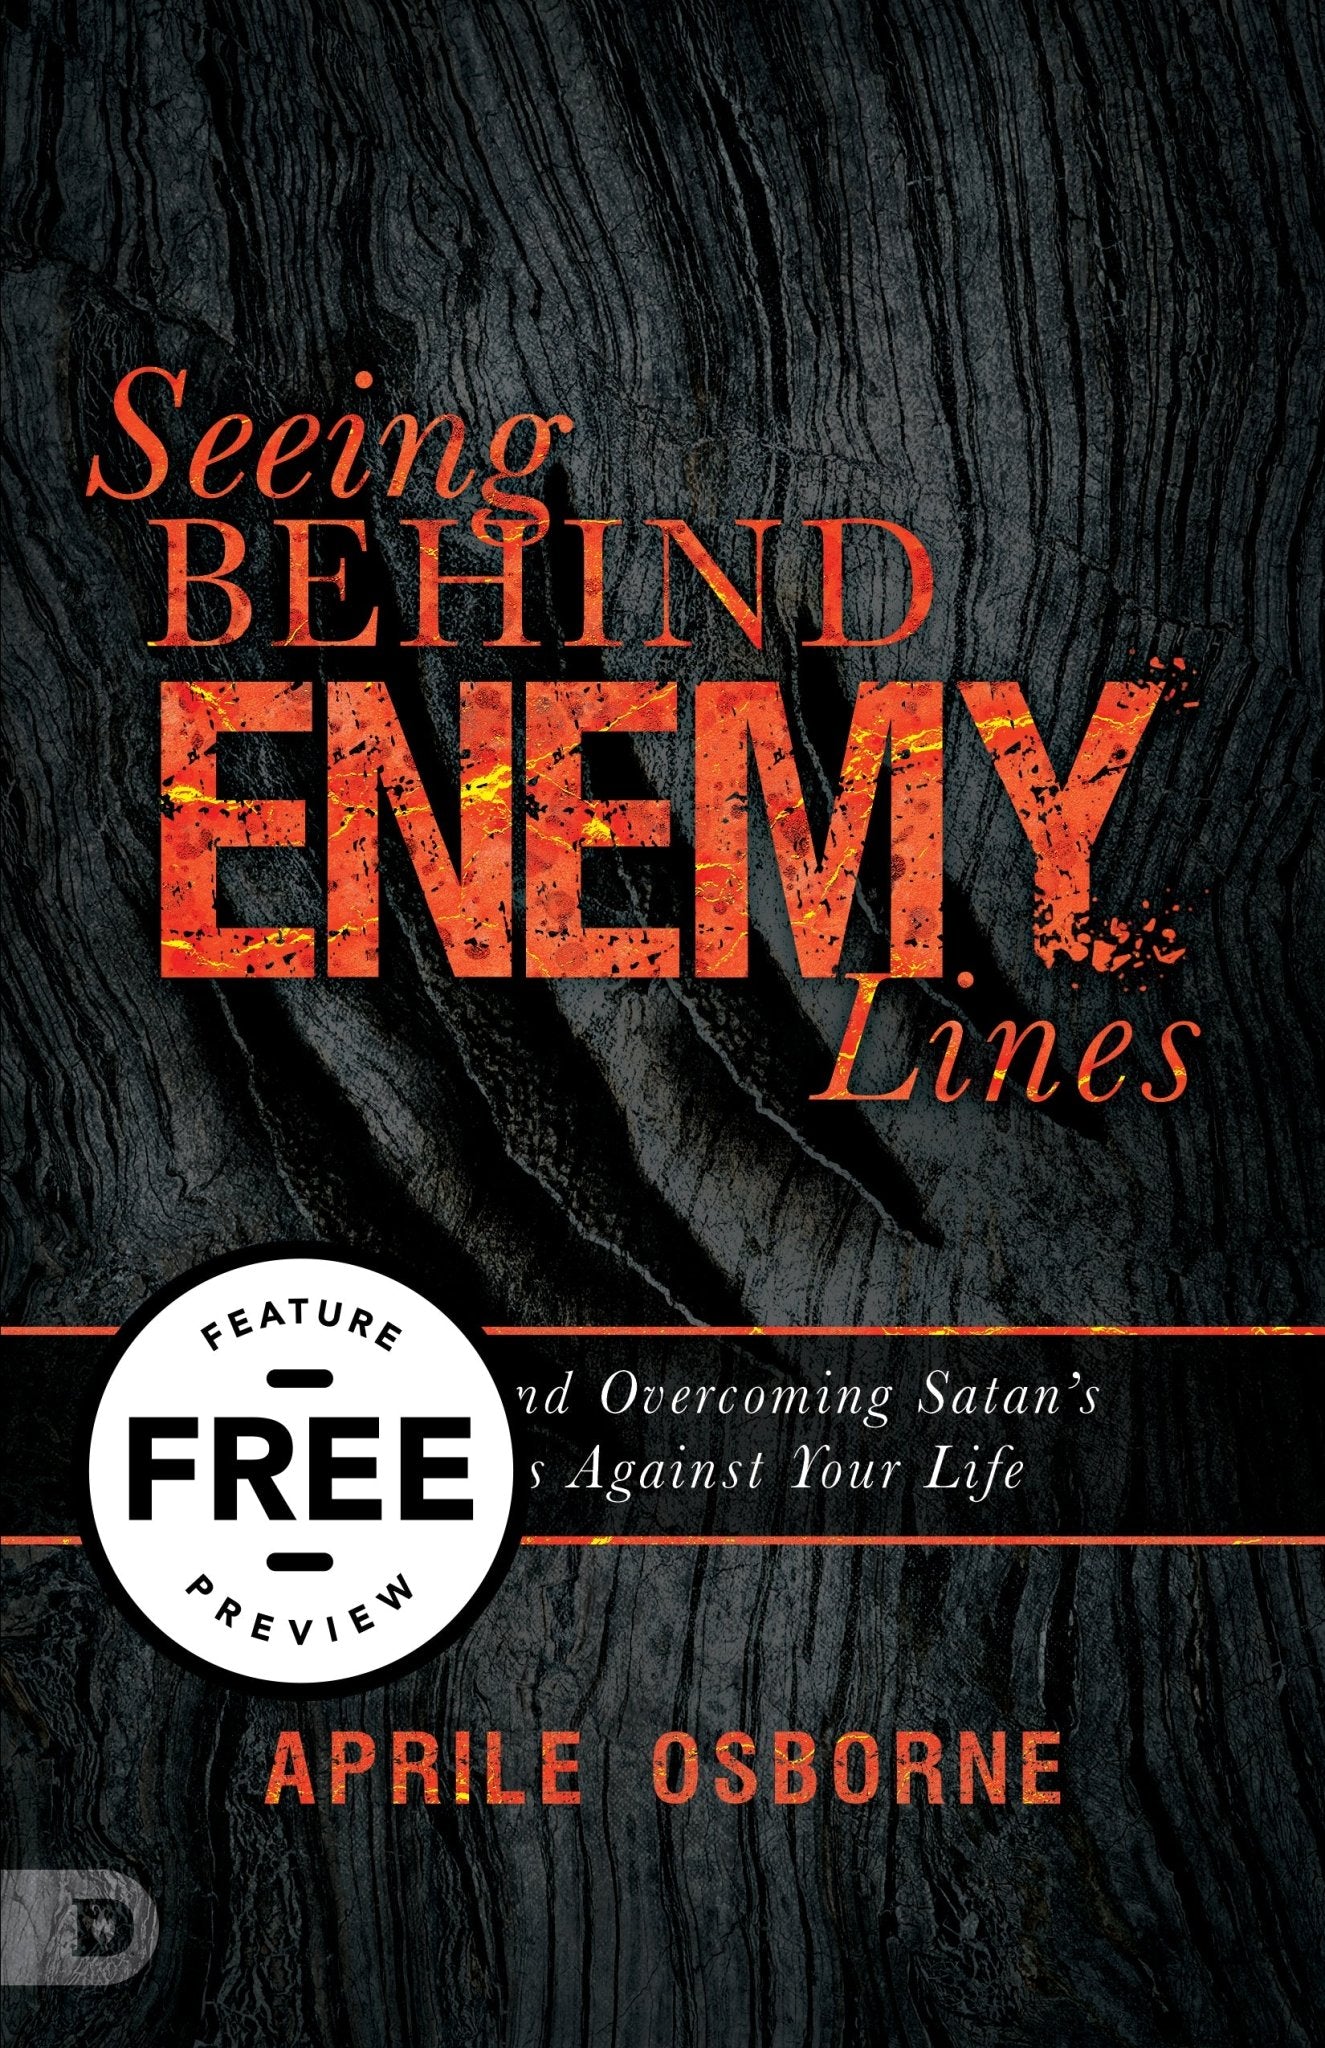 Seeing Behind Enemy Lines Free Feature Message (PDF Download)